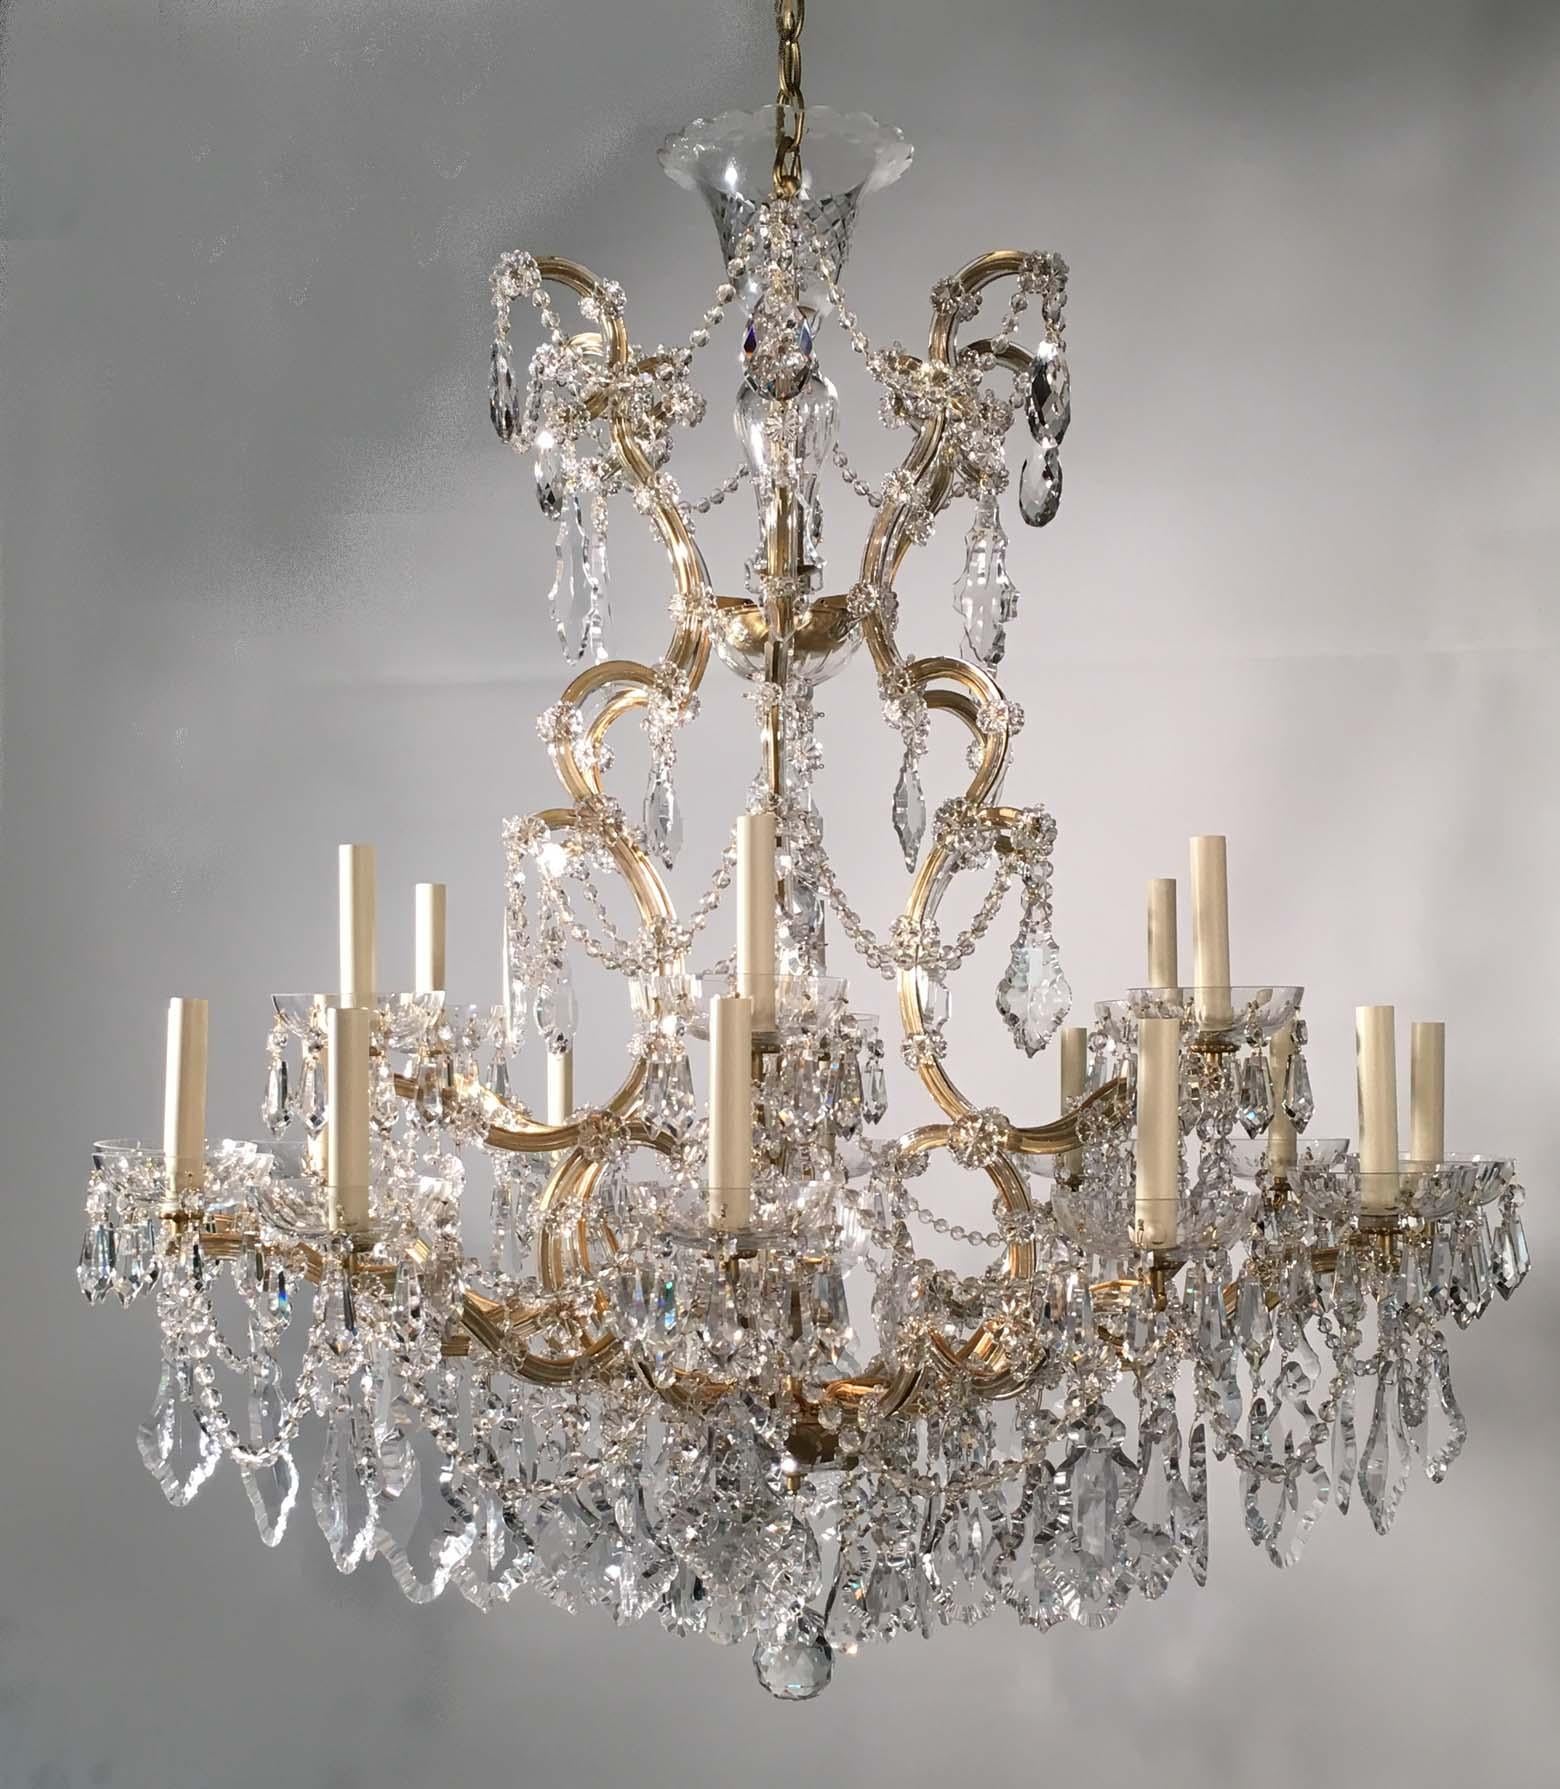 We call this type of high-quality chandelier a Maria Therese. It is chiefly distinguished from others by the fact that the arms are of flat metal but clad with crystal and applied with rosettes. They come in numerous sizes. They are a specialty of